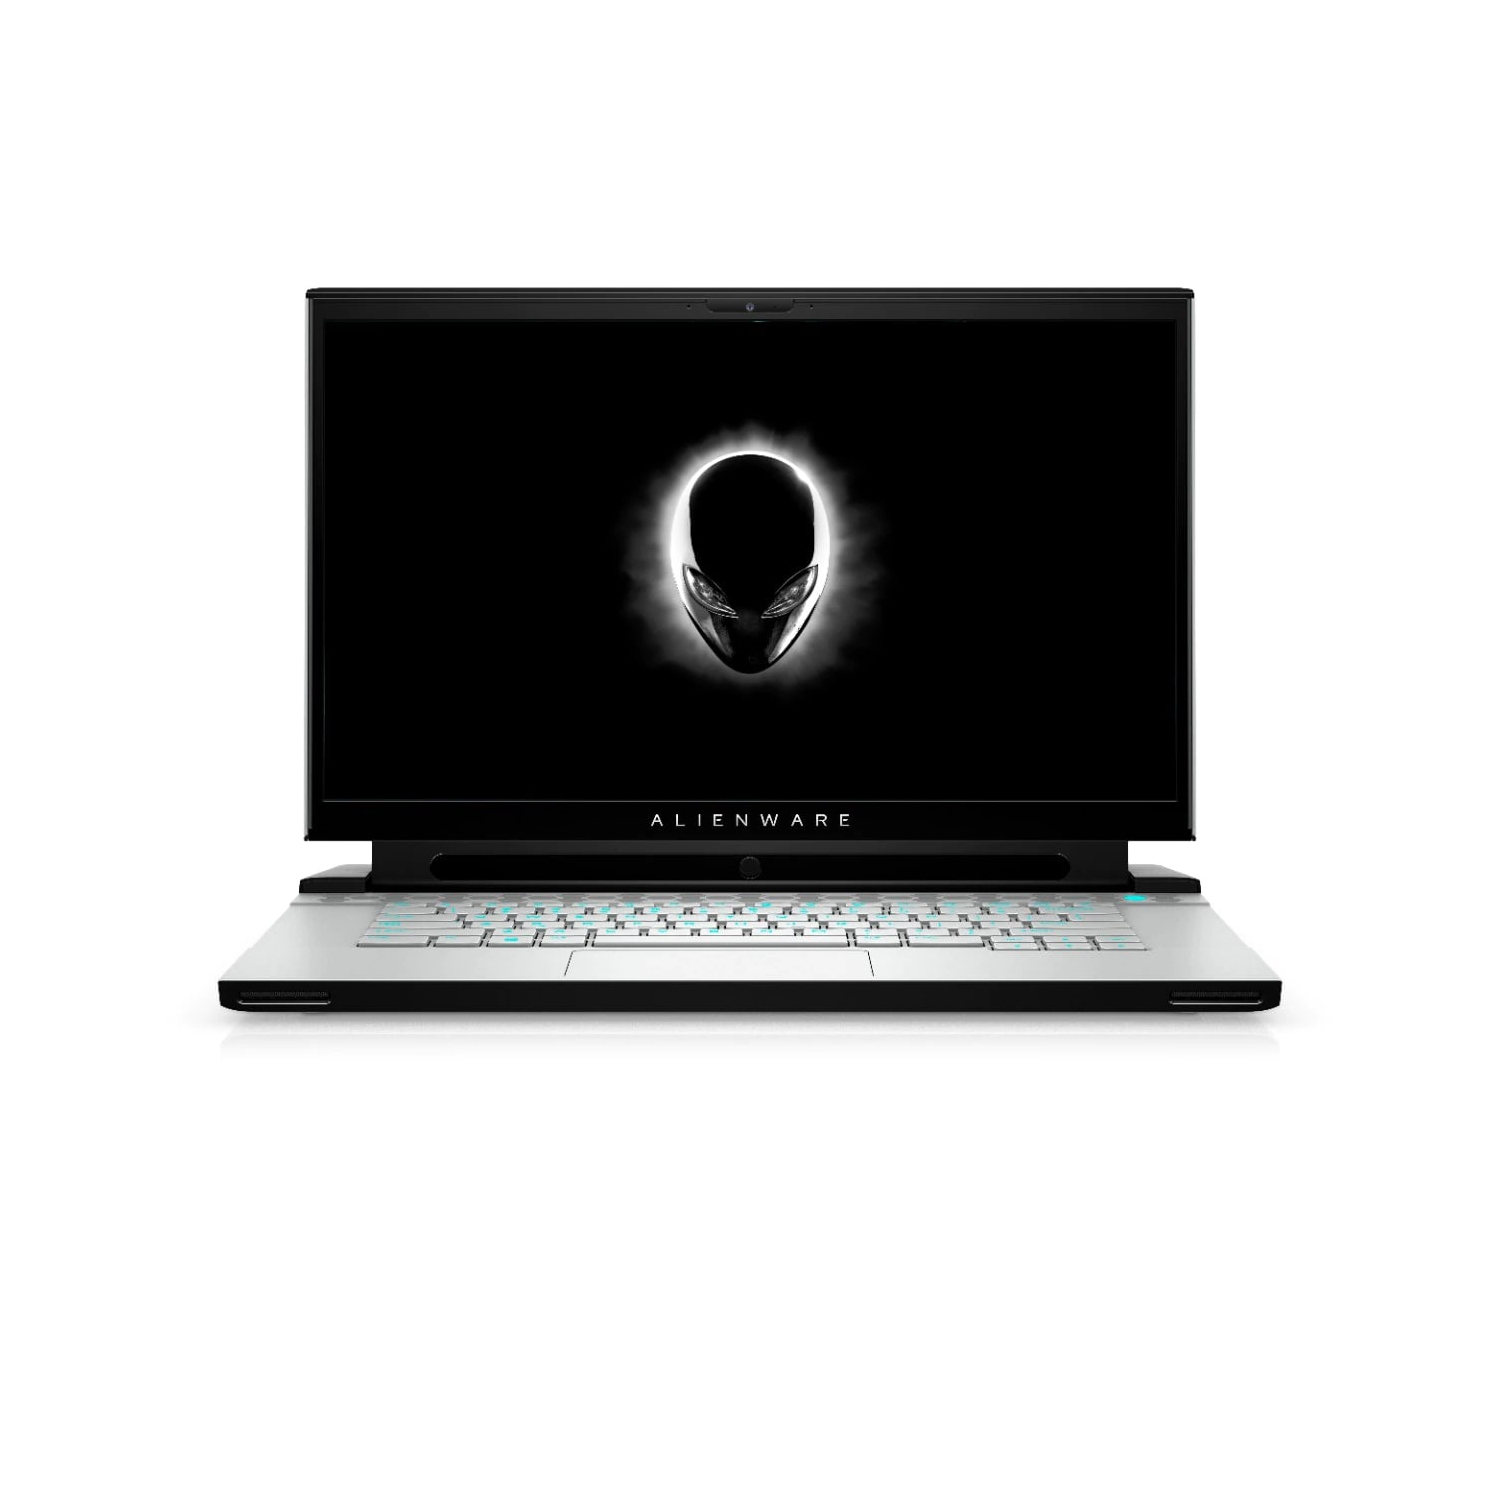 Refurbished (Excellent) - Dell Alienware m15 R3 Gaming Laptop (2020), 15.6" FHD, Core i7 - 512GB SSD + 512GB SSD - 32GB RAM - 2080 SUPER, 5.1 GHz - 10th Gen CPU Certified